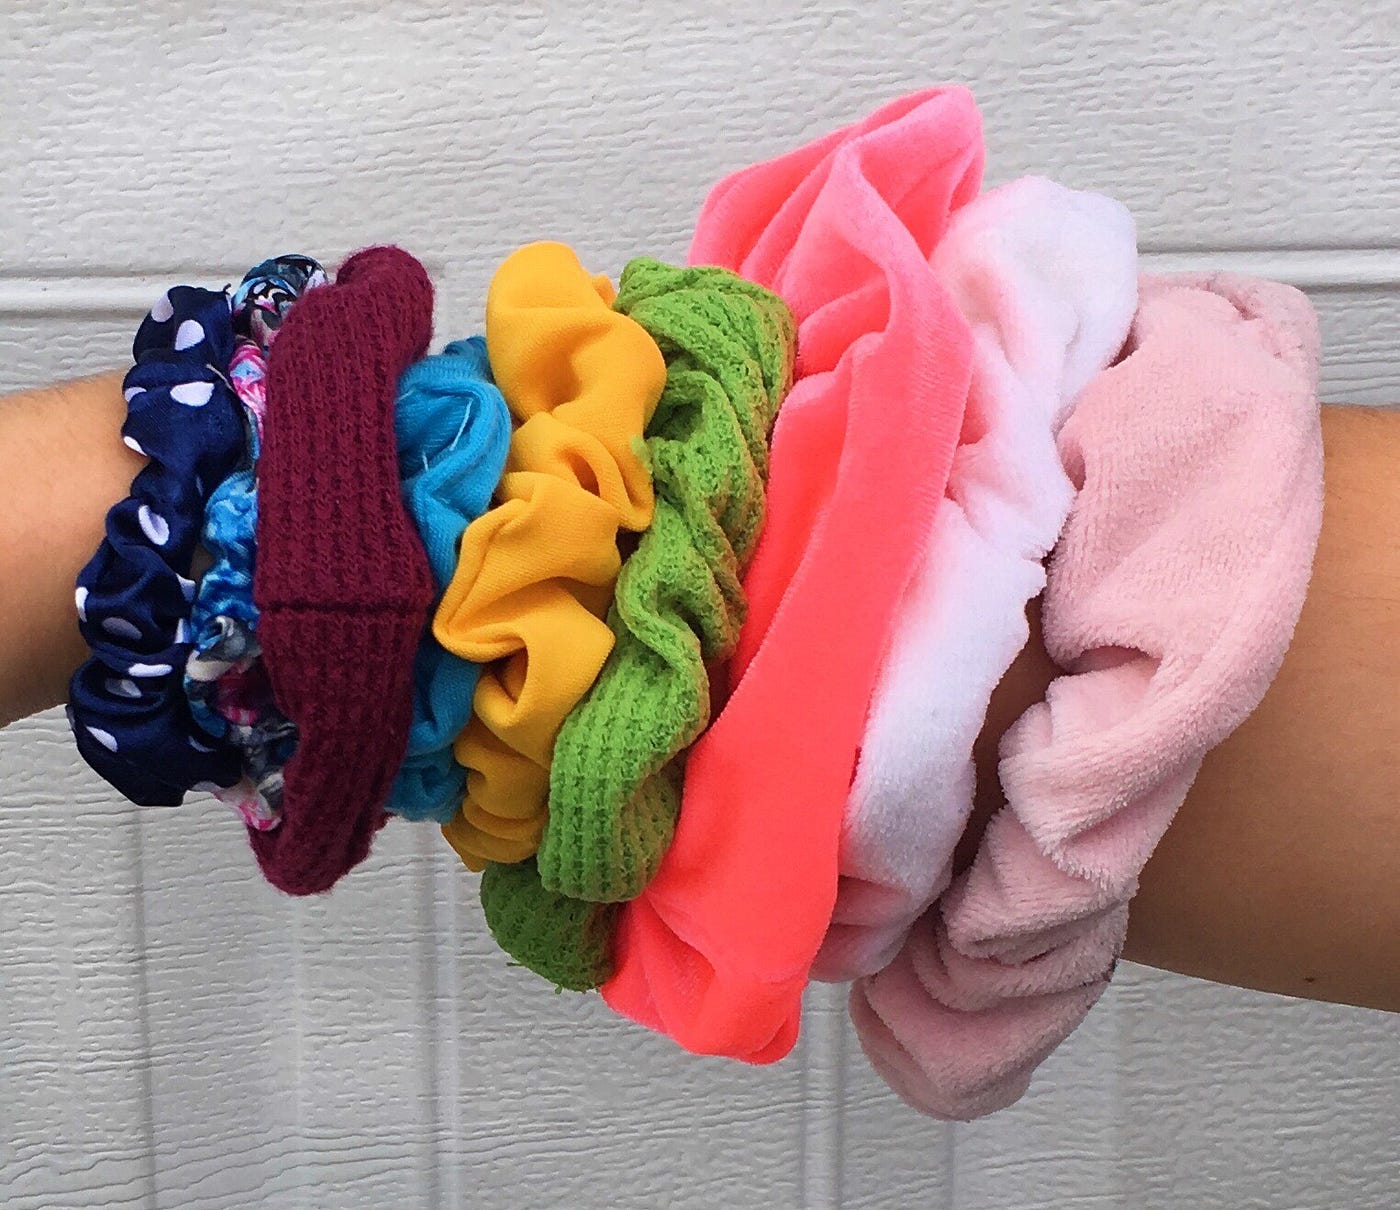 Not Your Regular Up-do. Throw in a scrunchie! | by Janet Surma | Medium